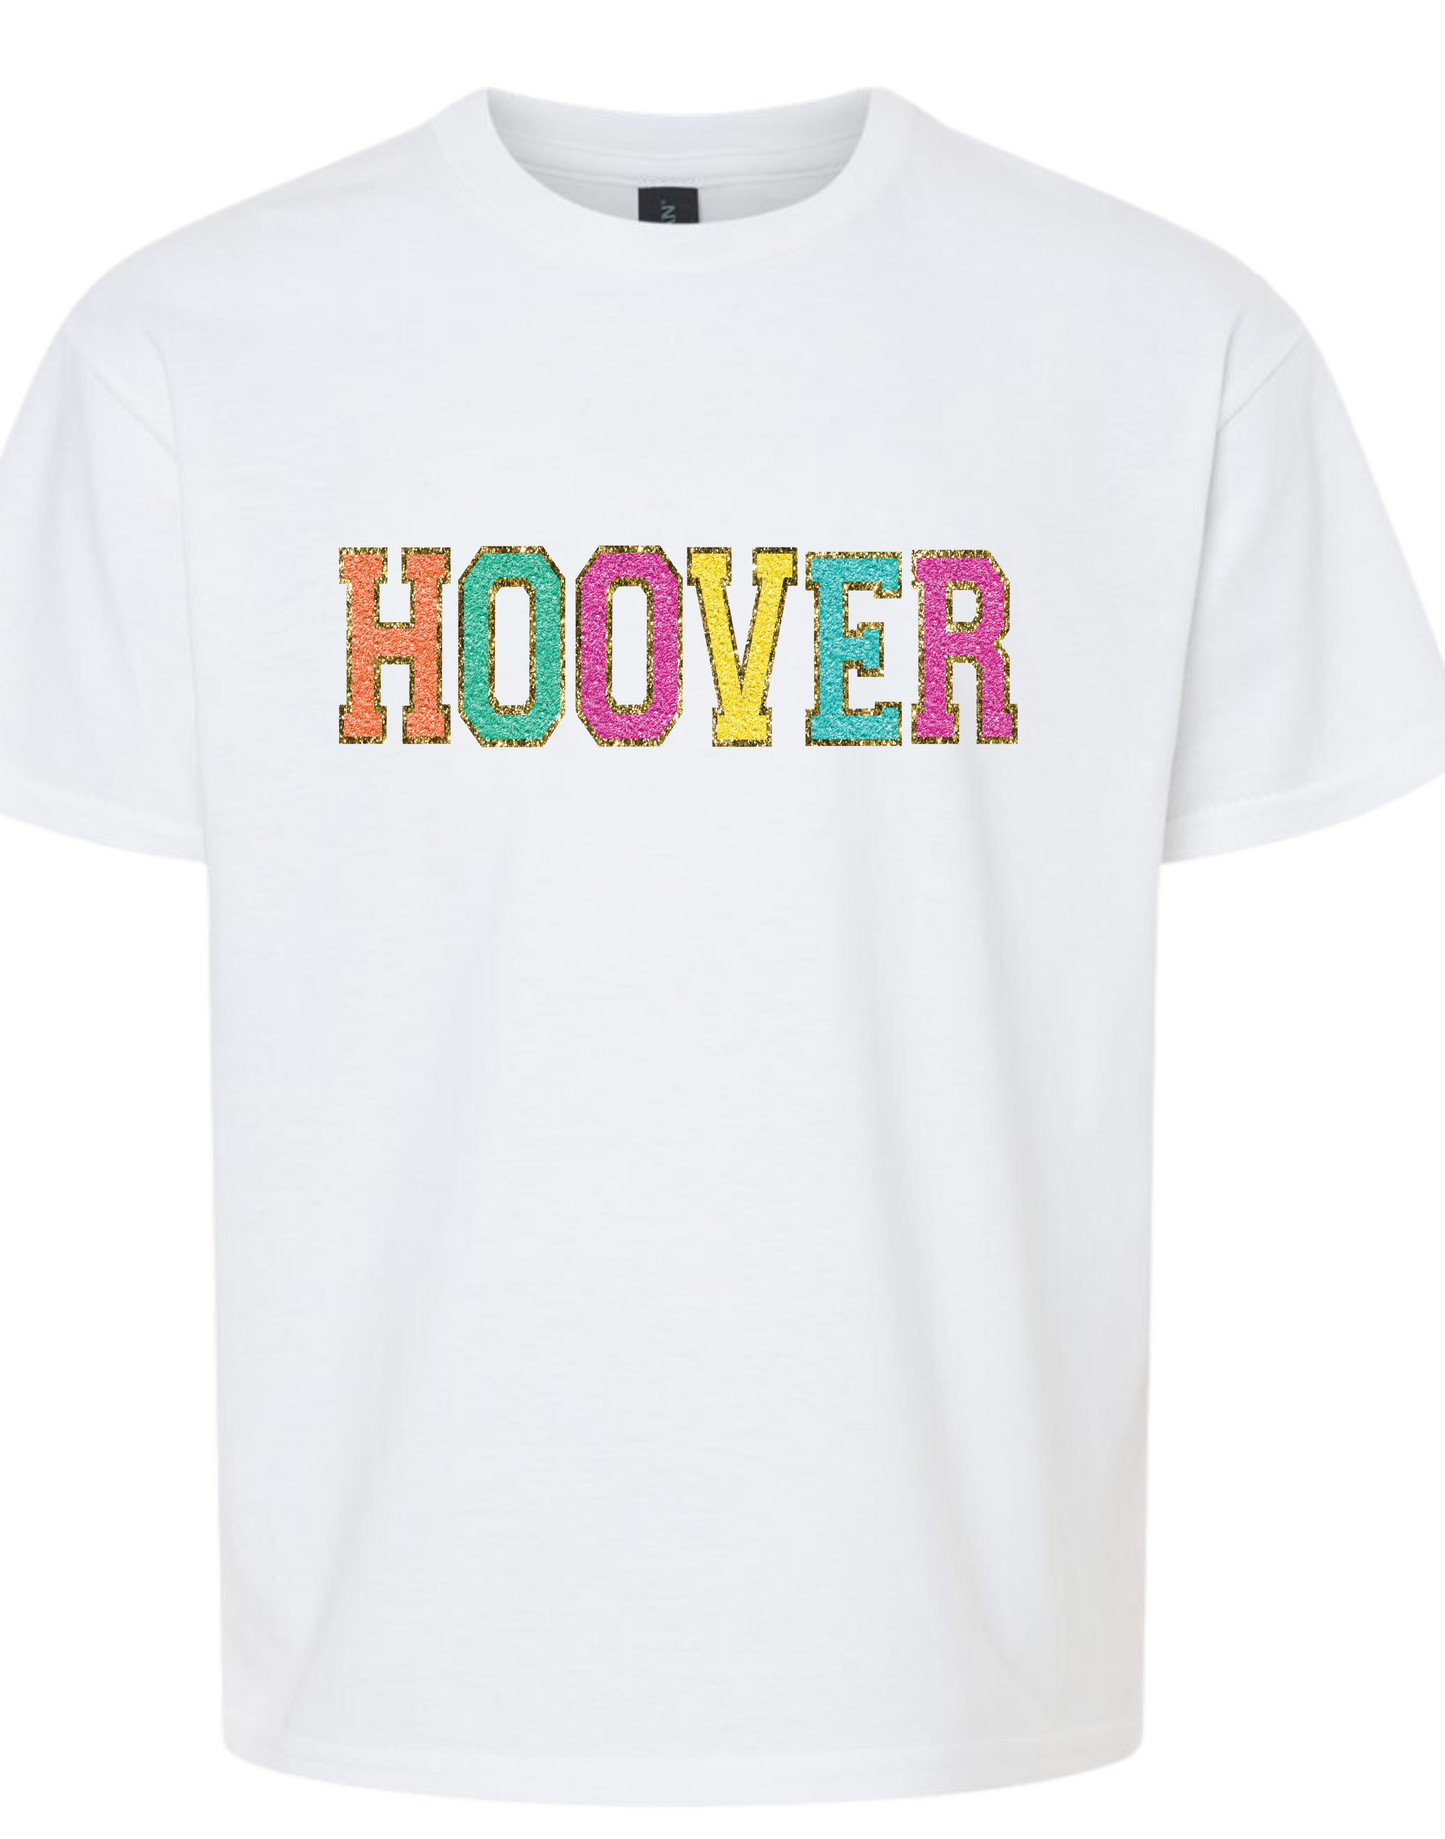 Hoover Color T'shirt